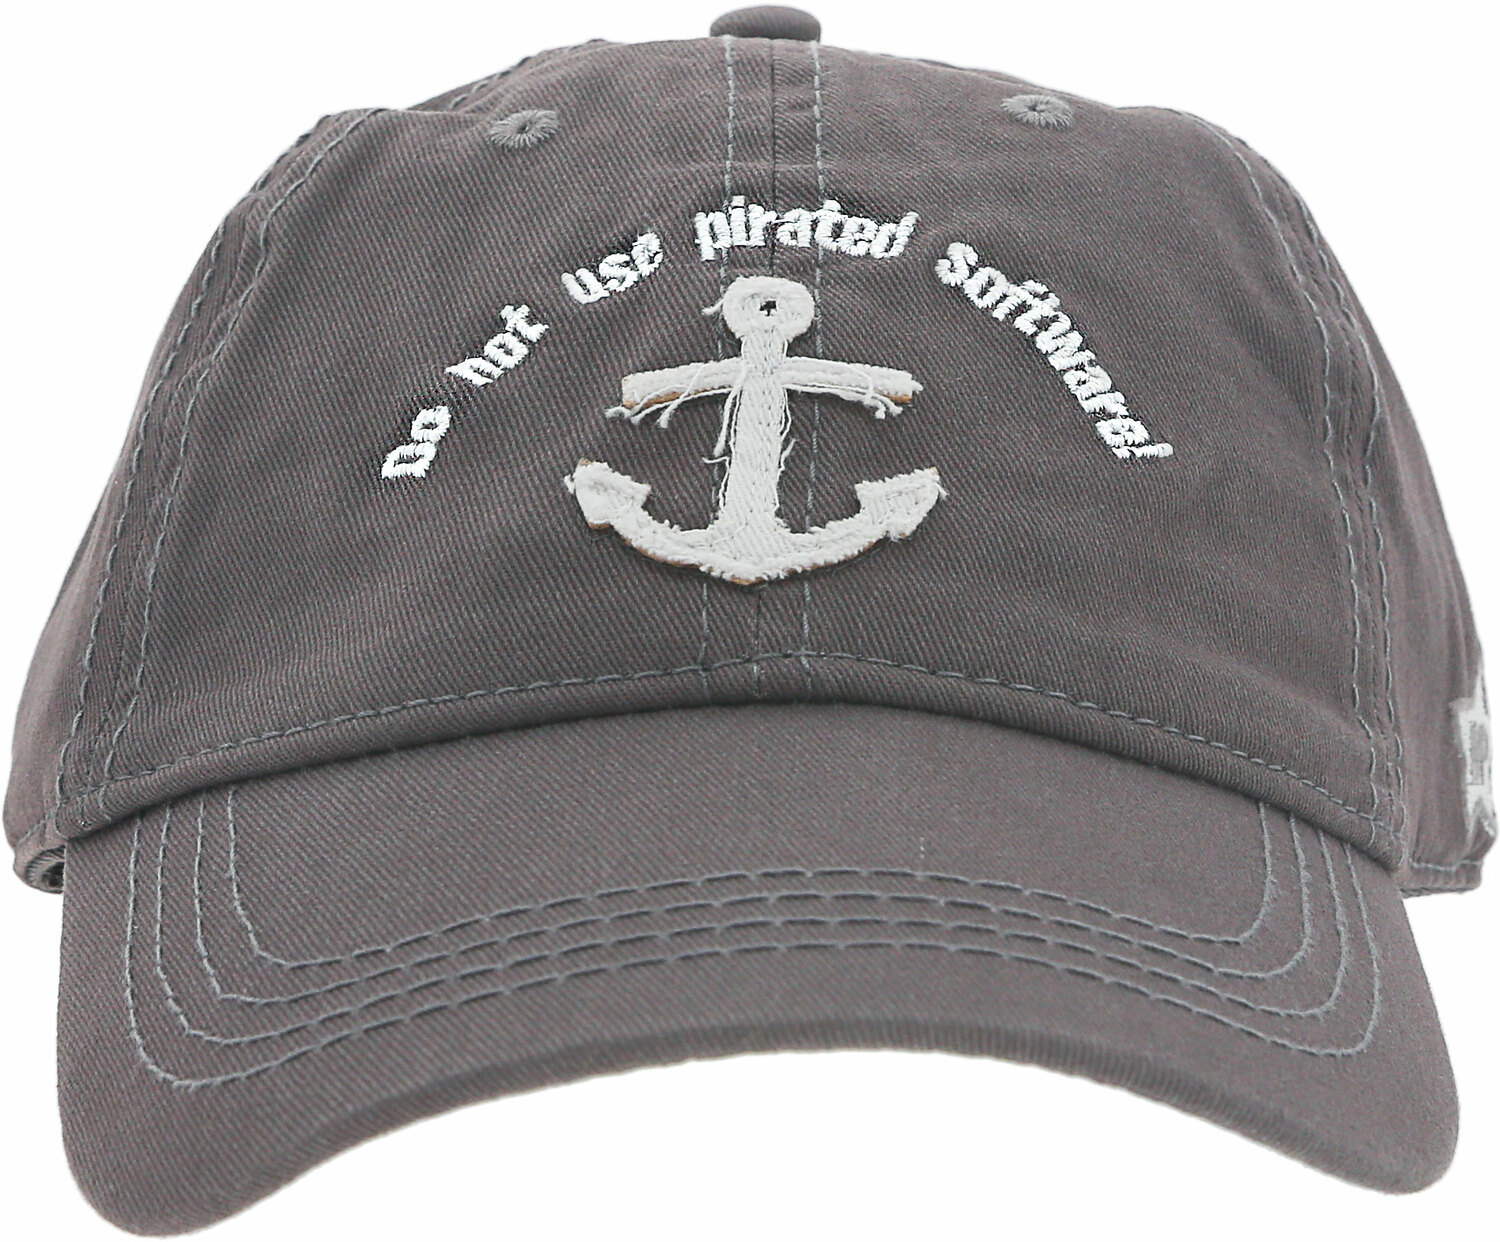 Pirated Software by Pavilion Accessories - Pirated Software - Dark Gray Adjustable Hat